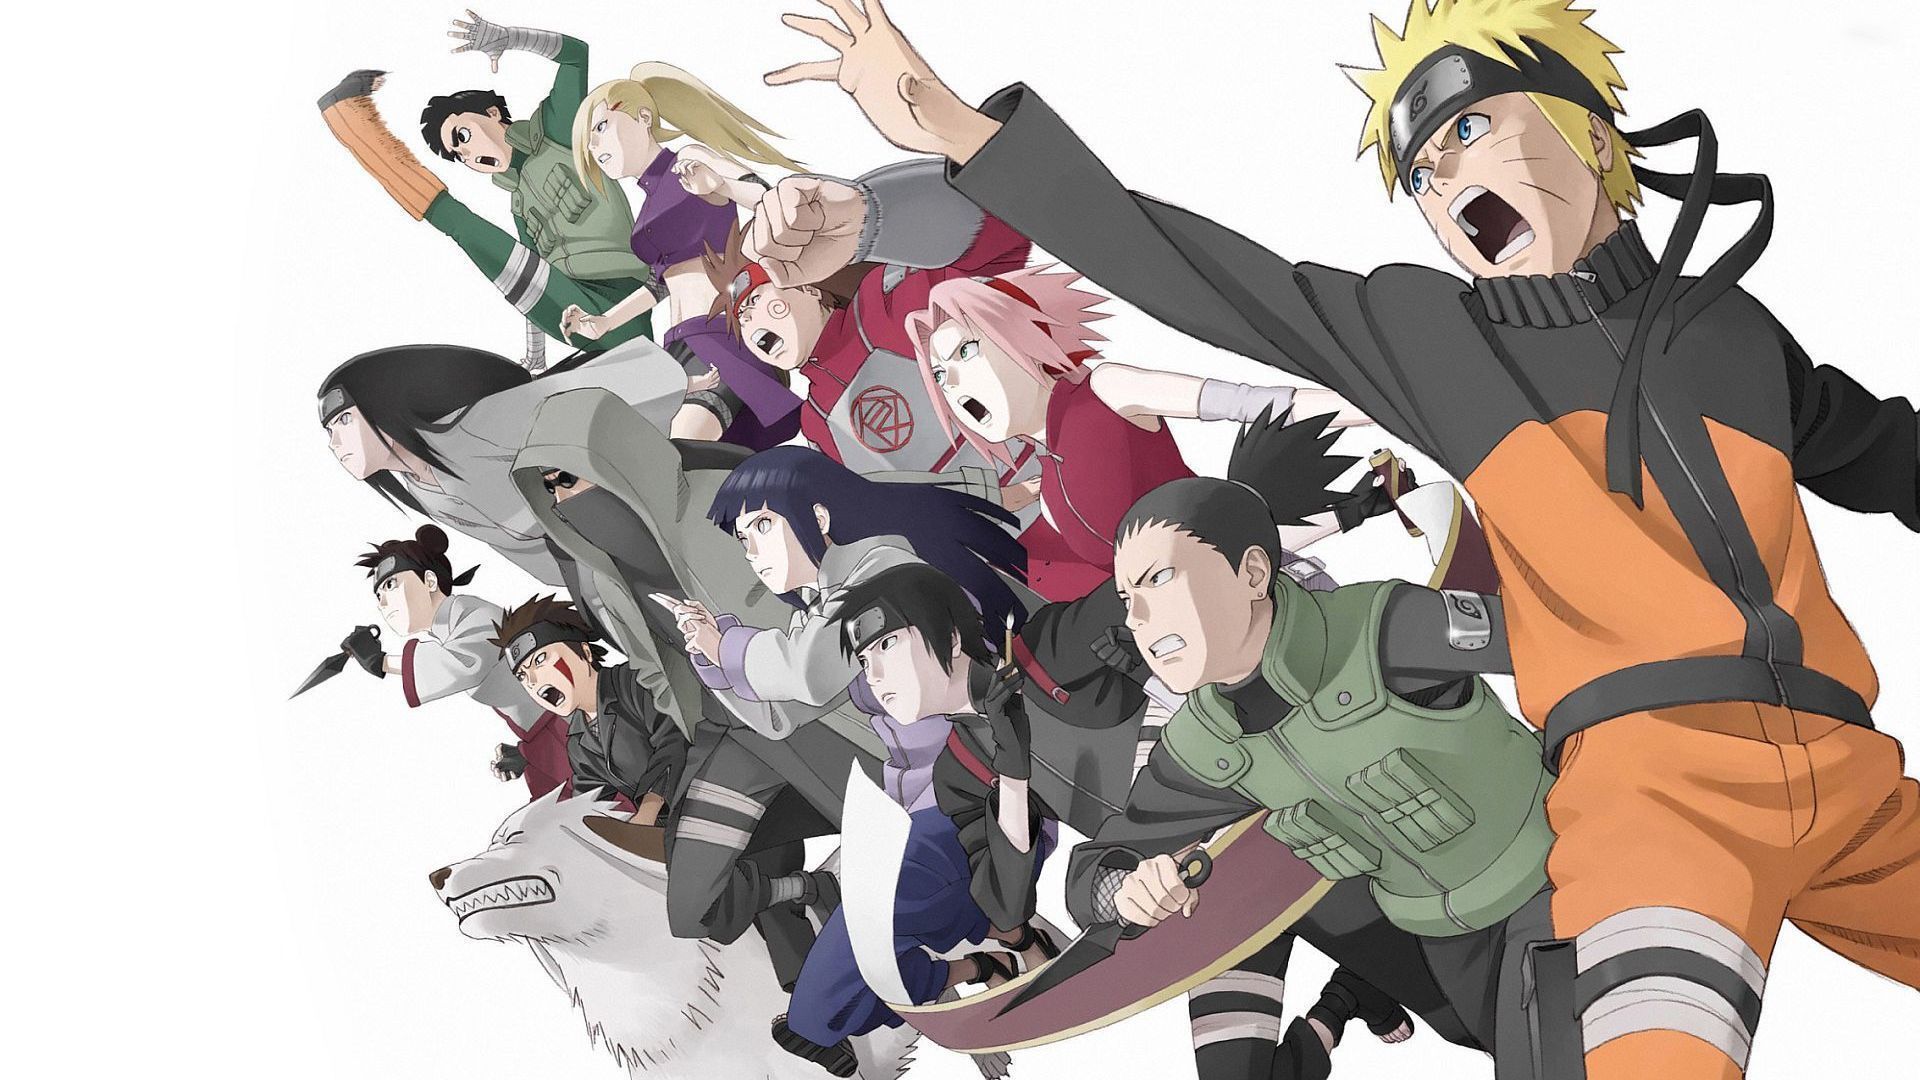 Naruto and Friends Wallpaper Free Naruto and Friends Background